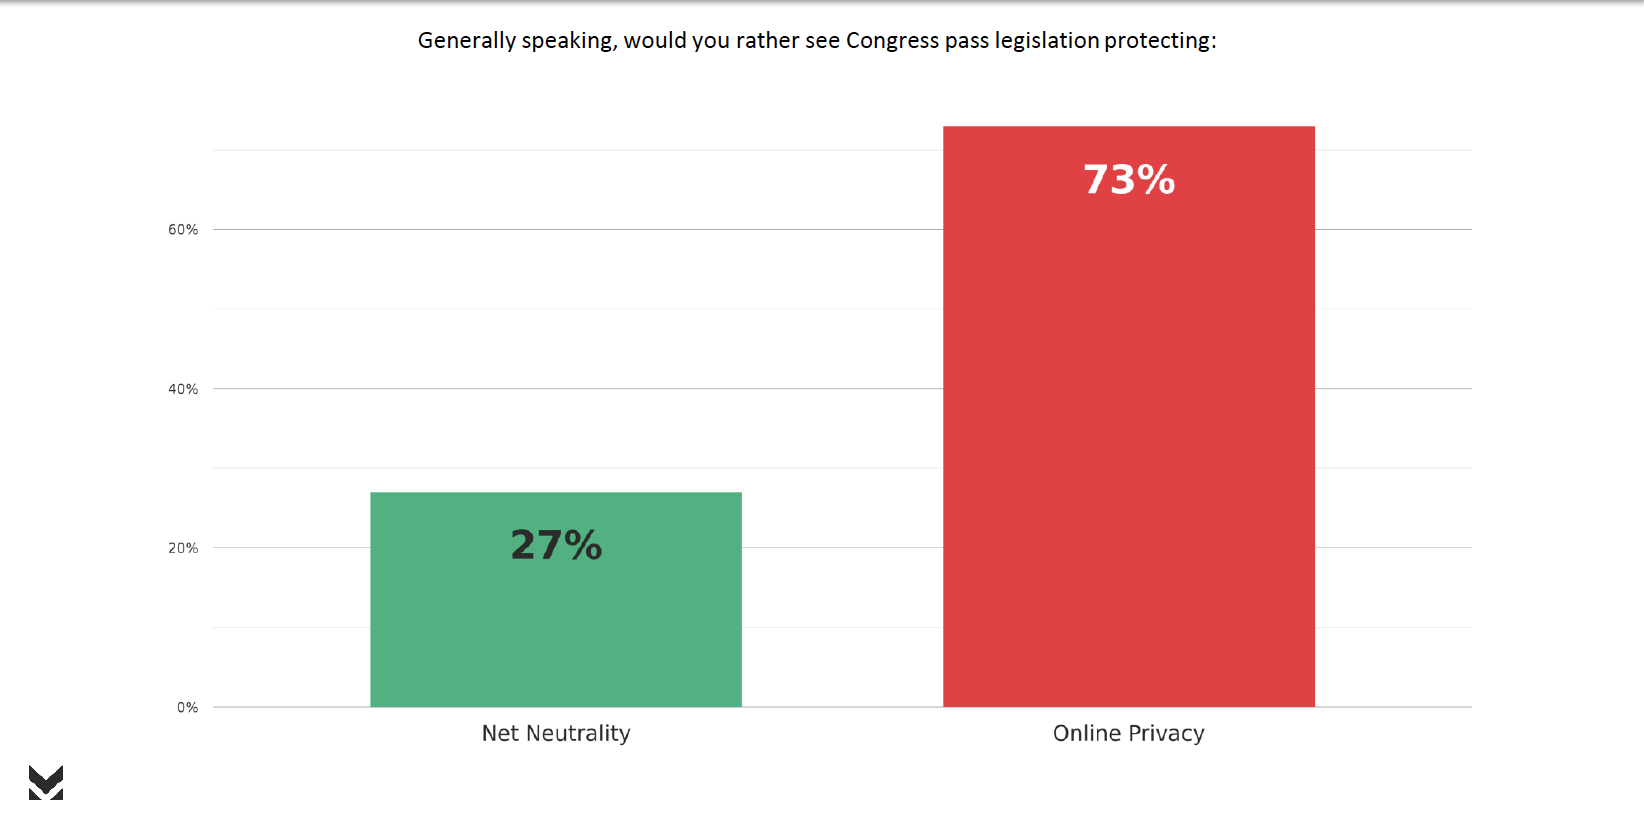 73 percent are more concerned about privacy